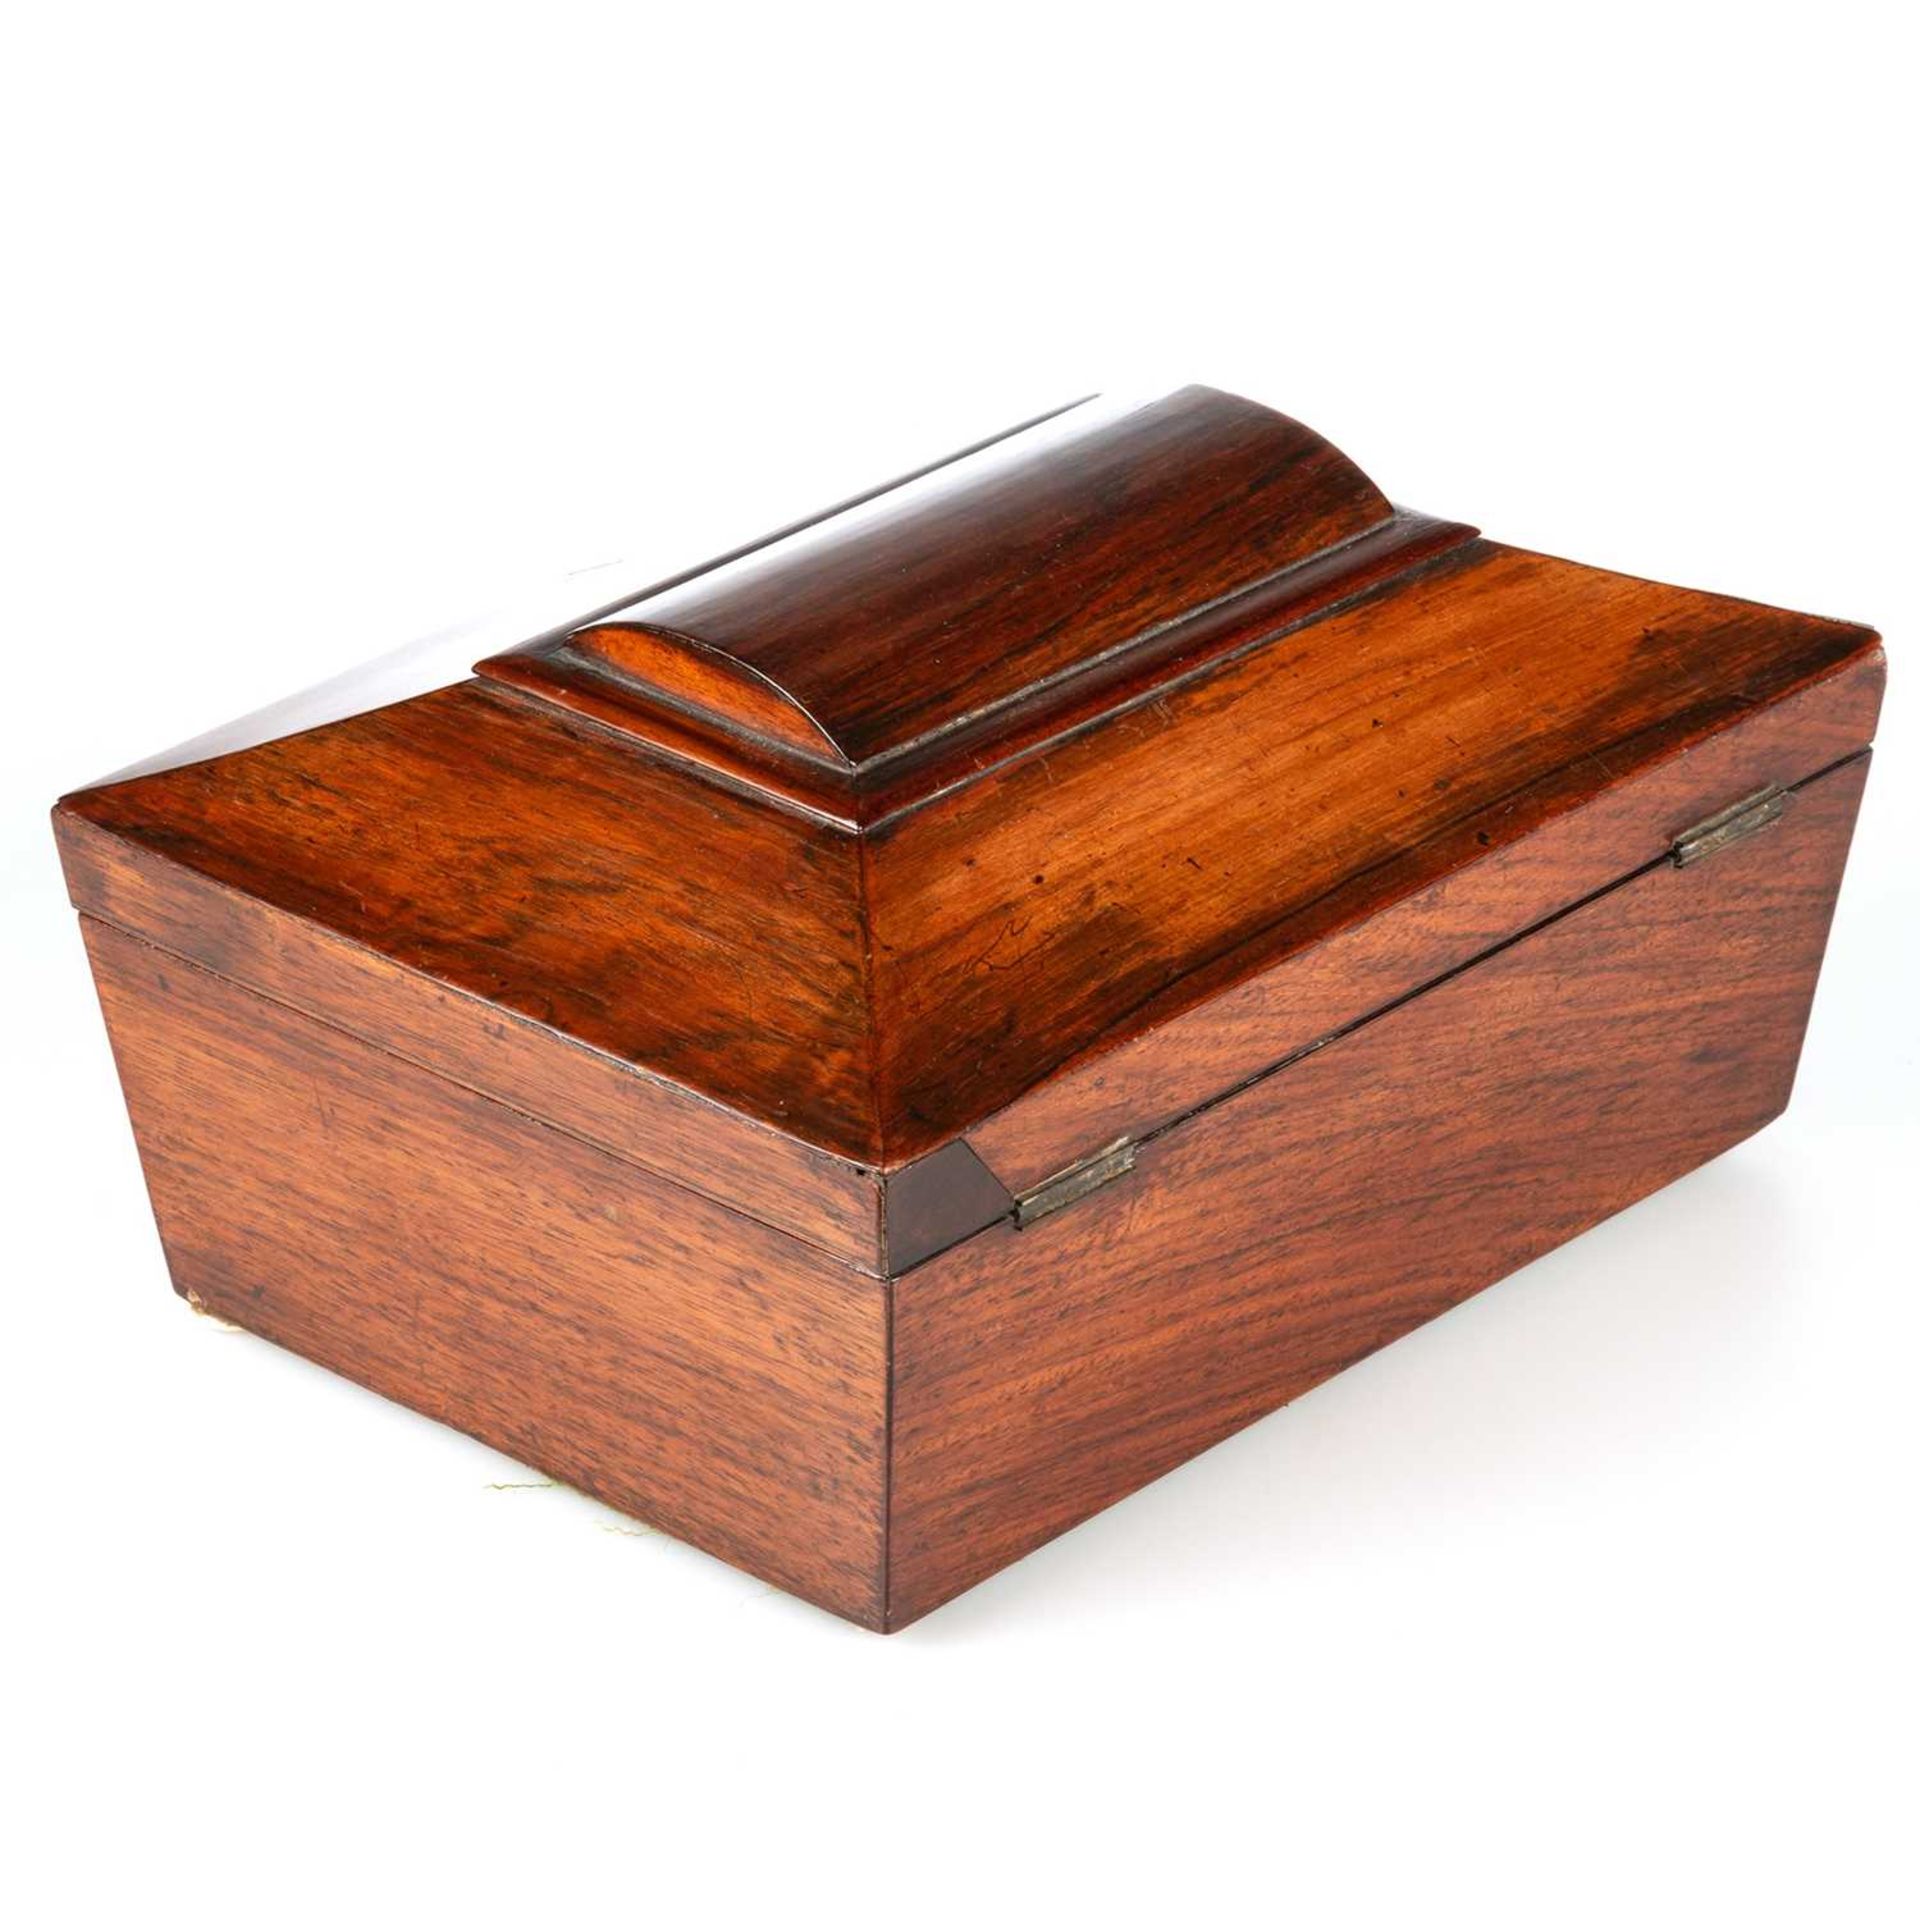 A 19TH CENTURY ROSEWOOD JEWELLERY BOX - Image 2 of 3